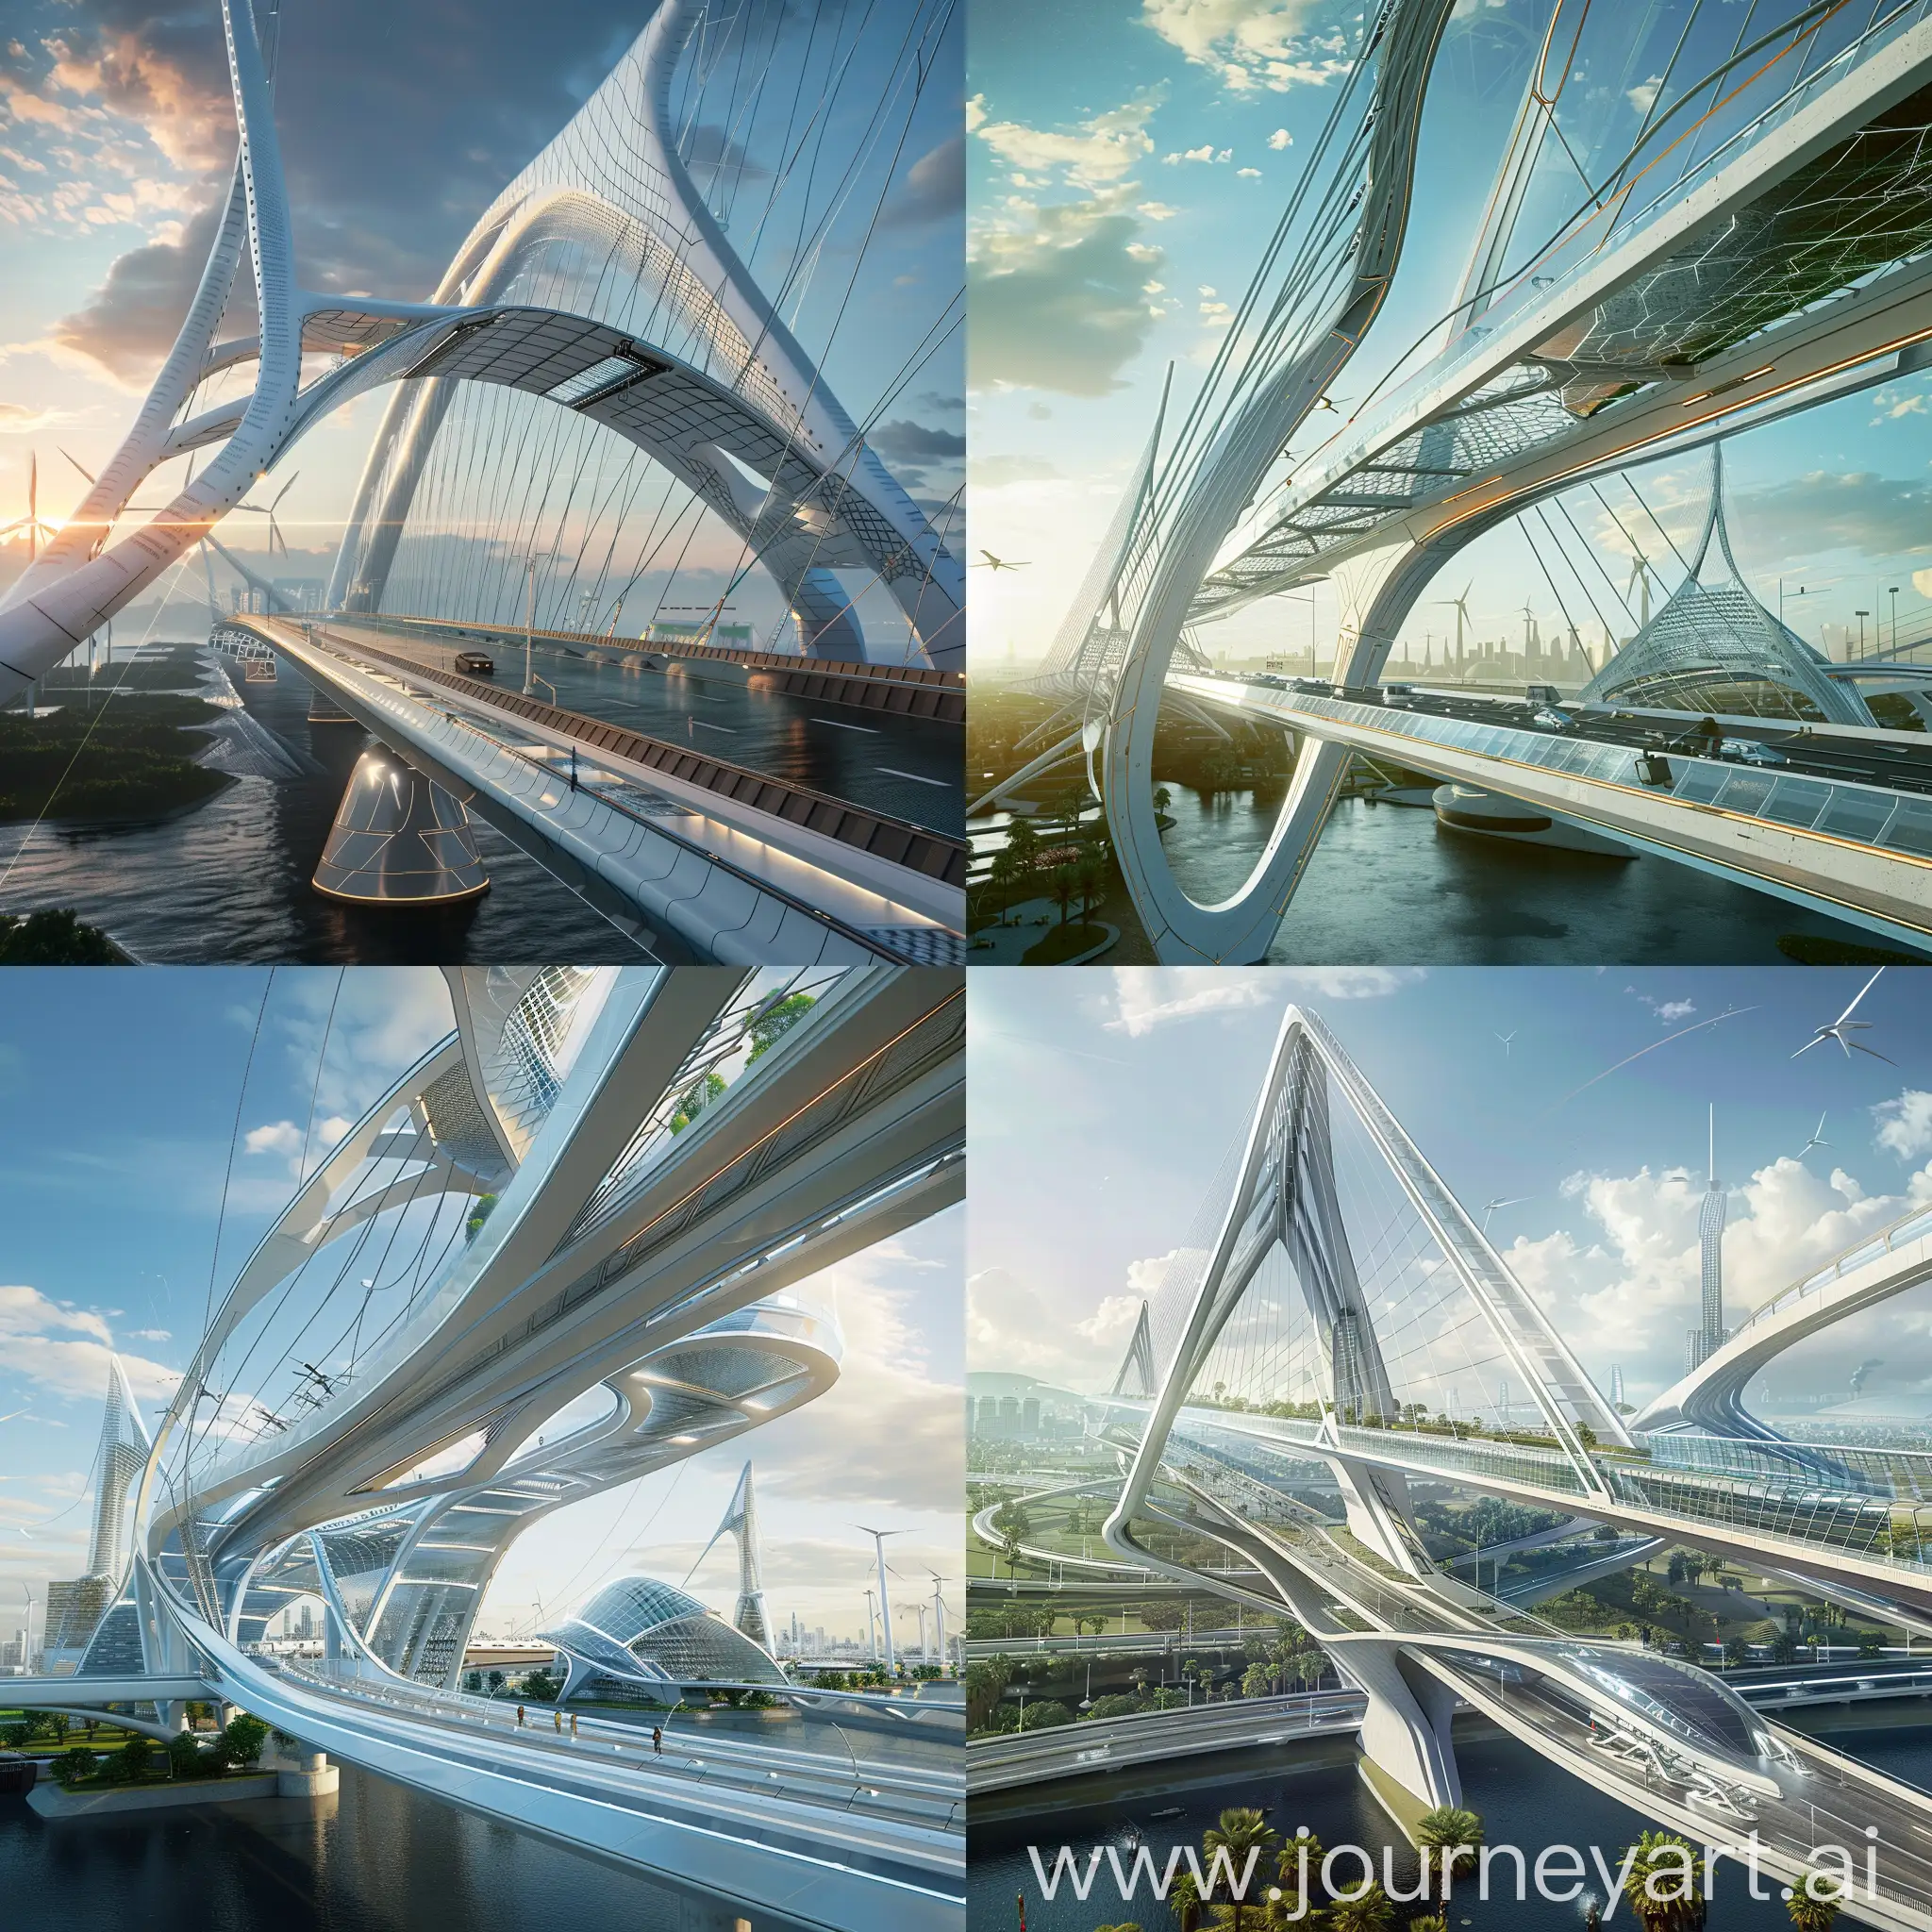 High-tech futuristic bridge, Smart Sensors, Aerodynamic Designs, Energy Harvesting Systems, Active Tuned Mass Dampers, Composite Materials, 3D-Printed Components, Automated Damage Detection, Magnetic Levitation Elements, Thermal Expansion Joints, LED Lighting Systems, Dynamic Lighting, Interactive Displays, Drone Ports, Green Spaces, Adaptive Traffic Lanes, Wind Turbines, Solar Panel Cladding, Water Collection Systems, Pedestrian Skywalks, Augmented Reality Guides, unreal engine 5 --stylize 1000